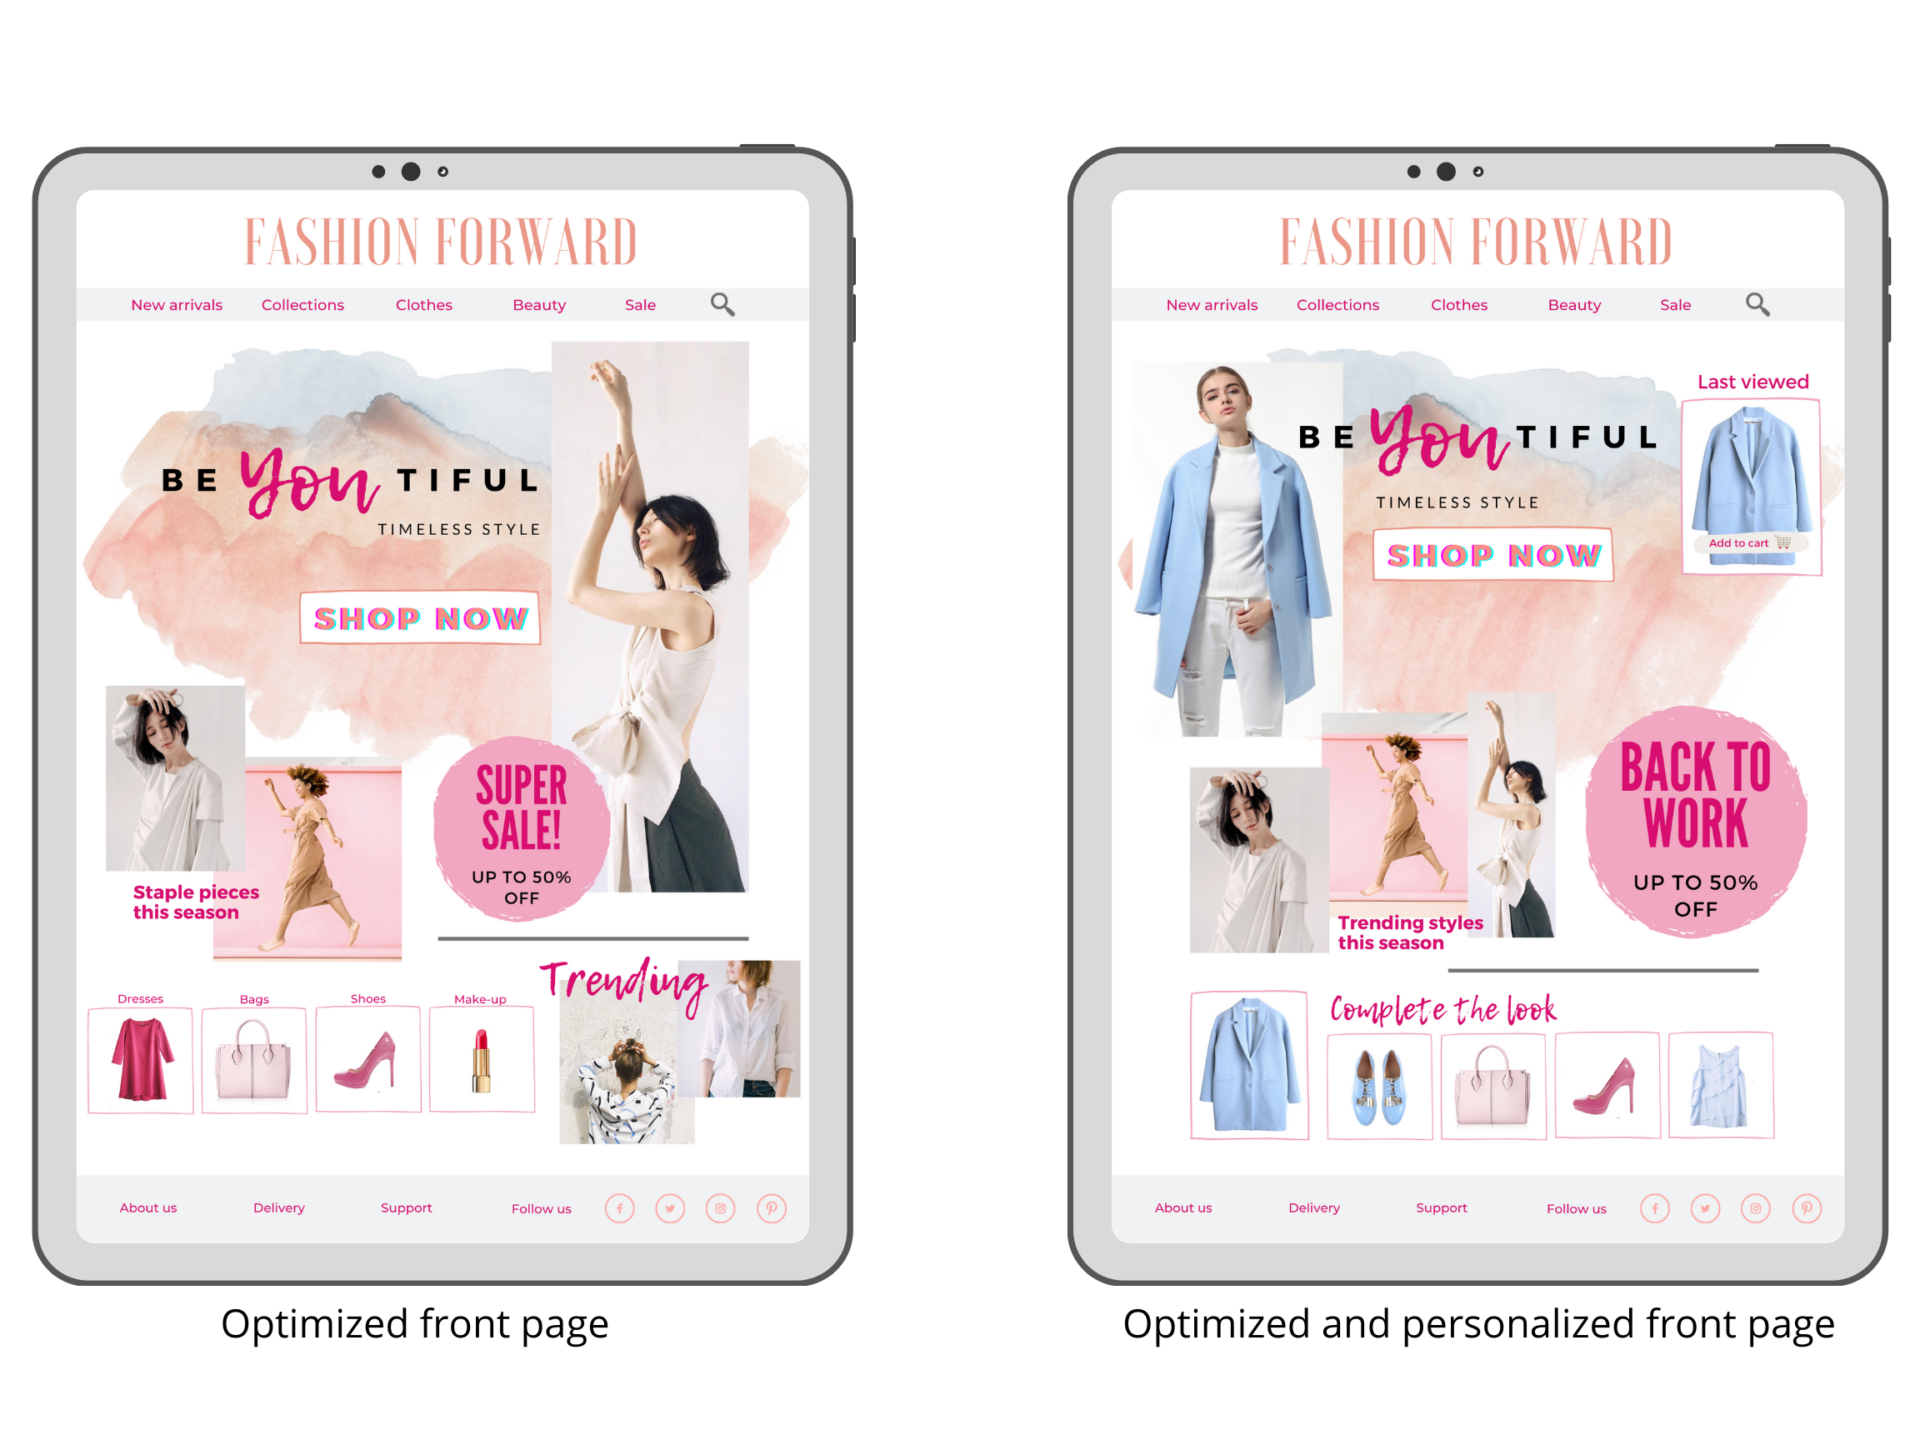 Mitigate fashion ecommerce challenges with personalization